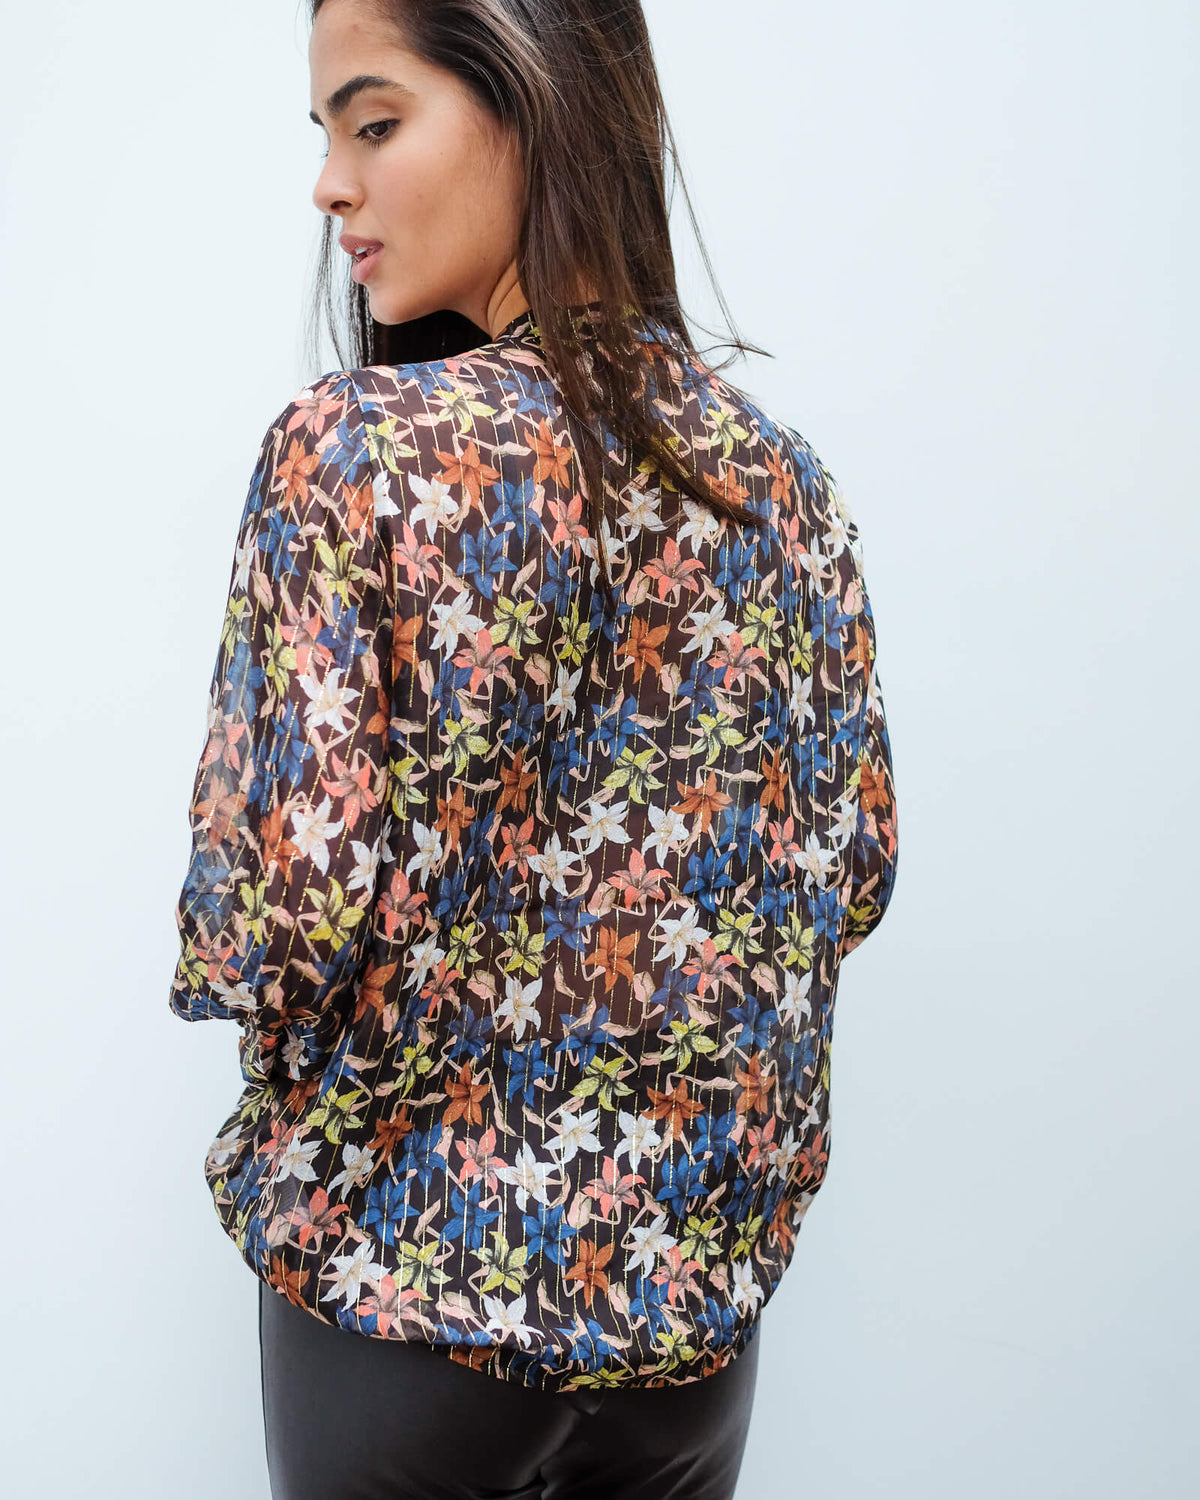 M Kickoff floral blouse in black